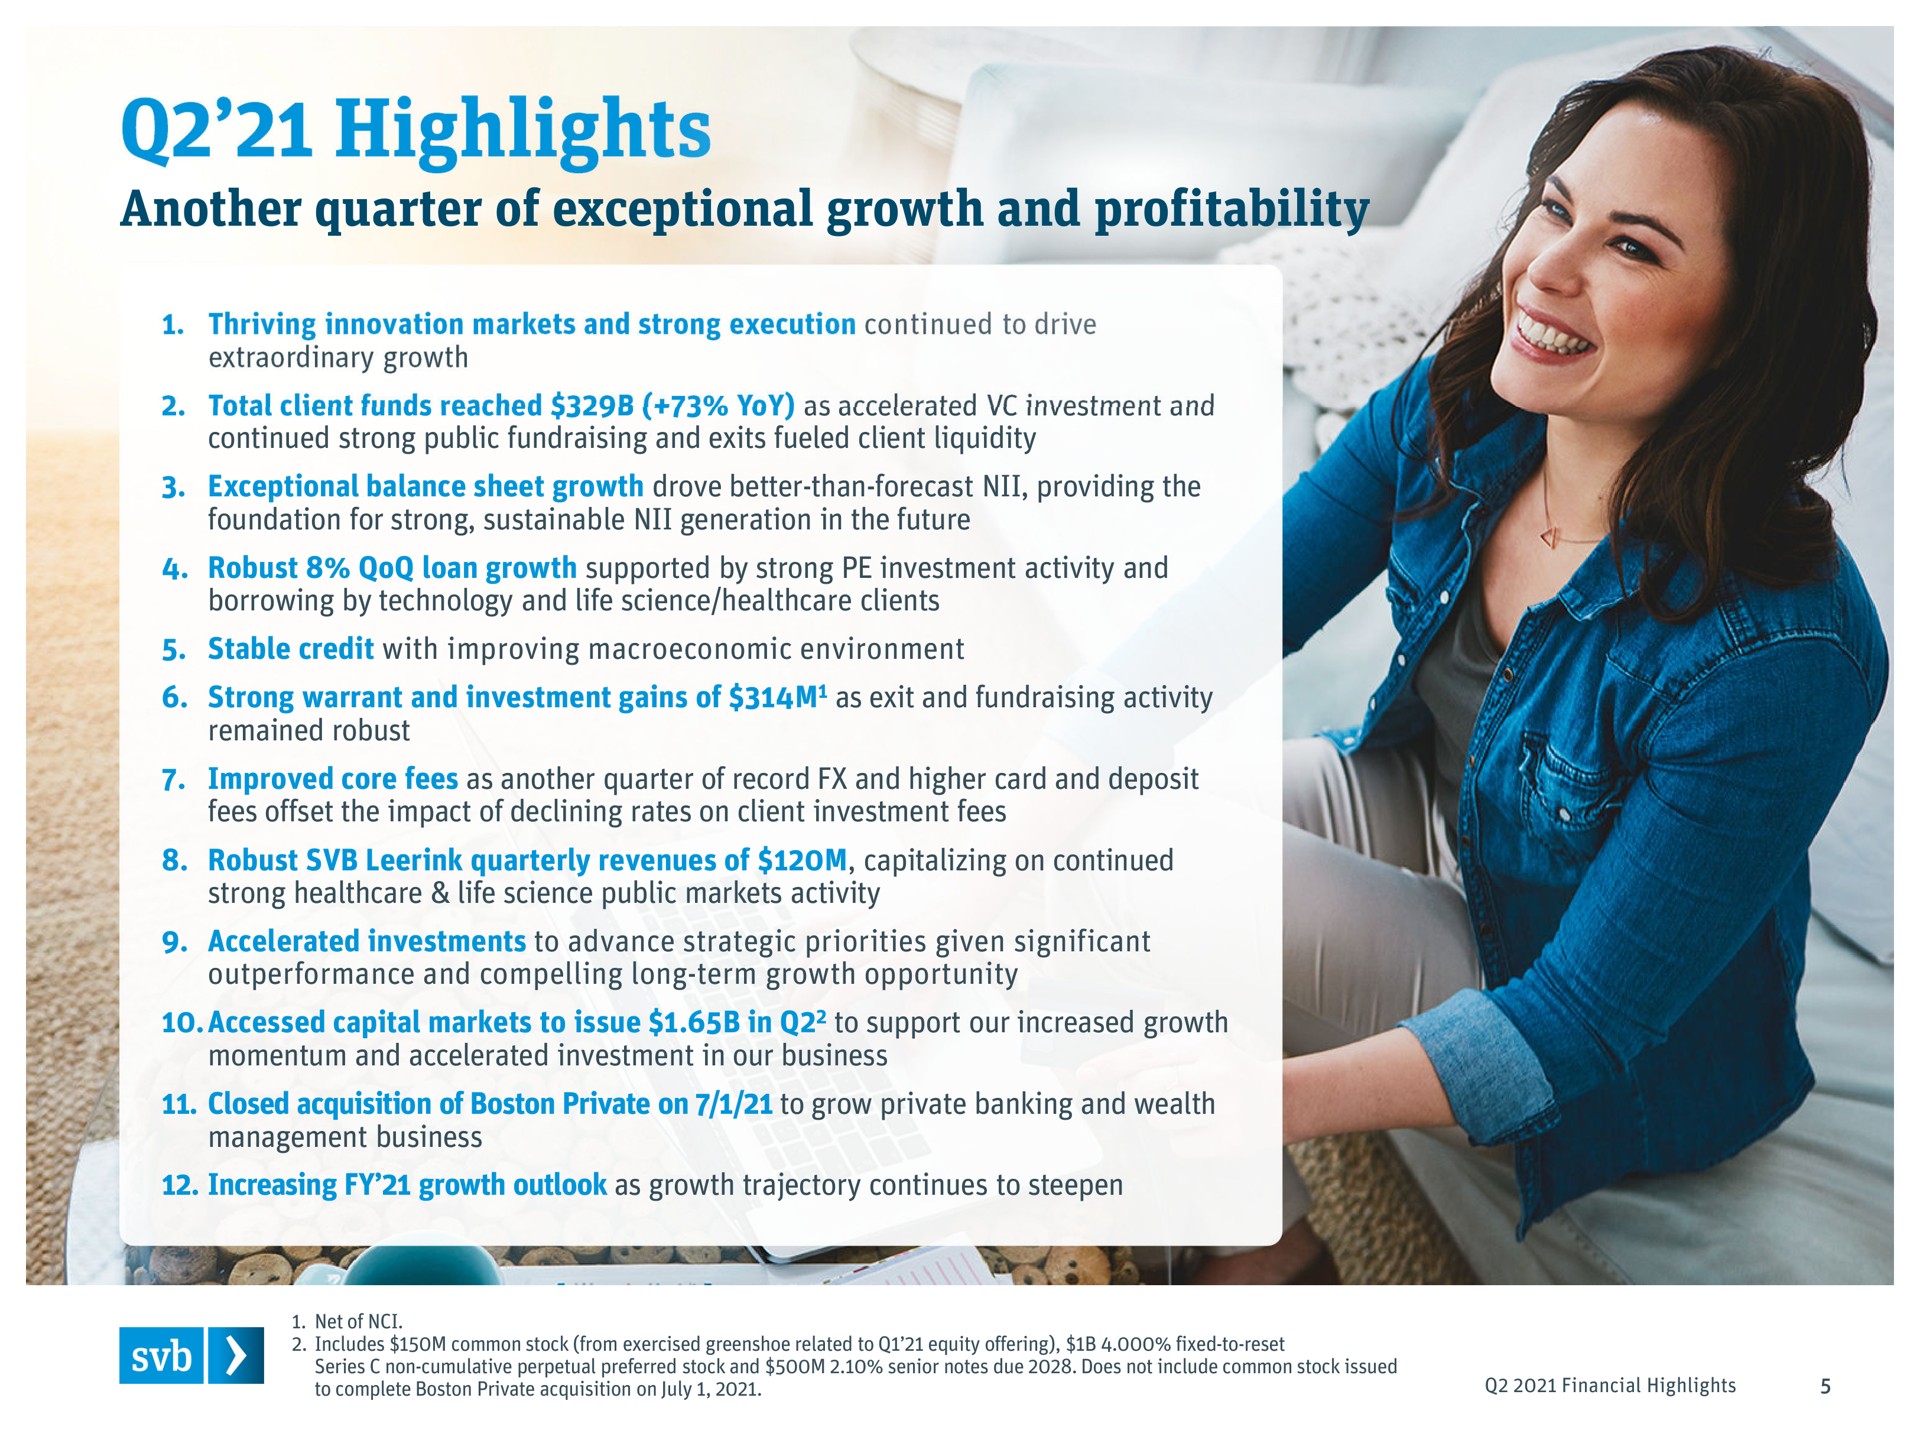 highlights another quarter of exceptional growth and profitability | Silicon Valley Bank